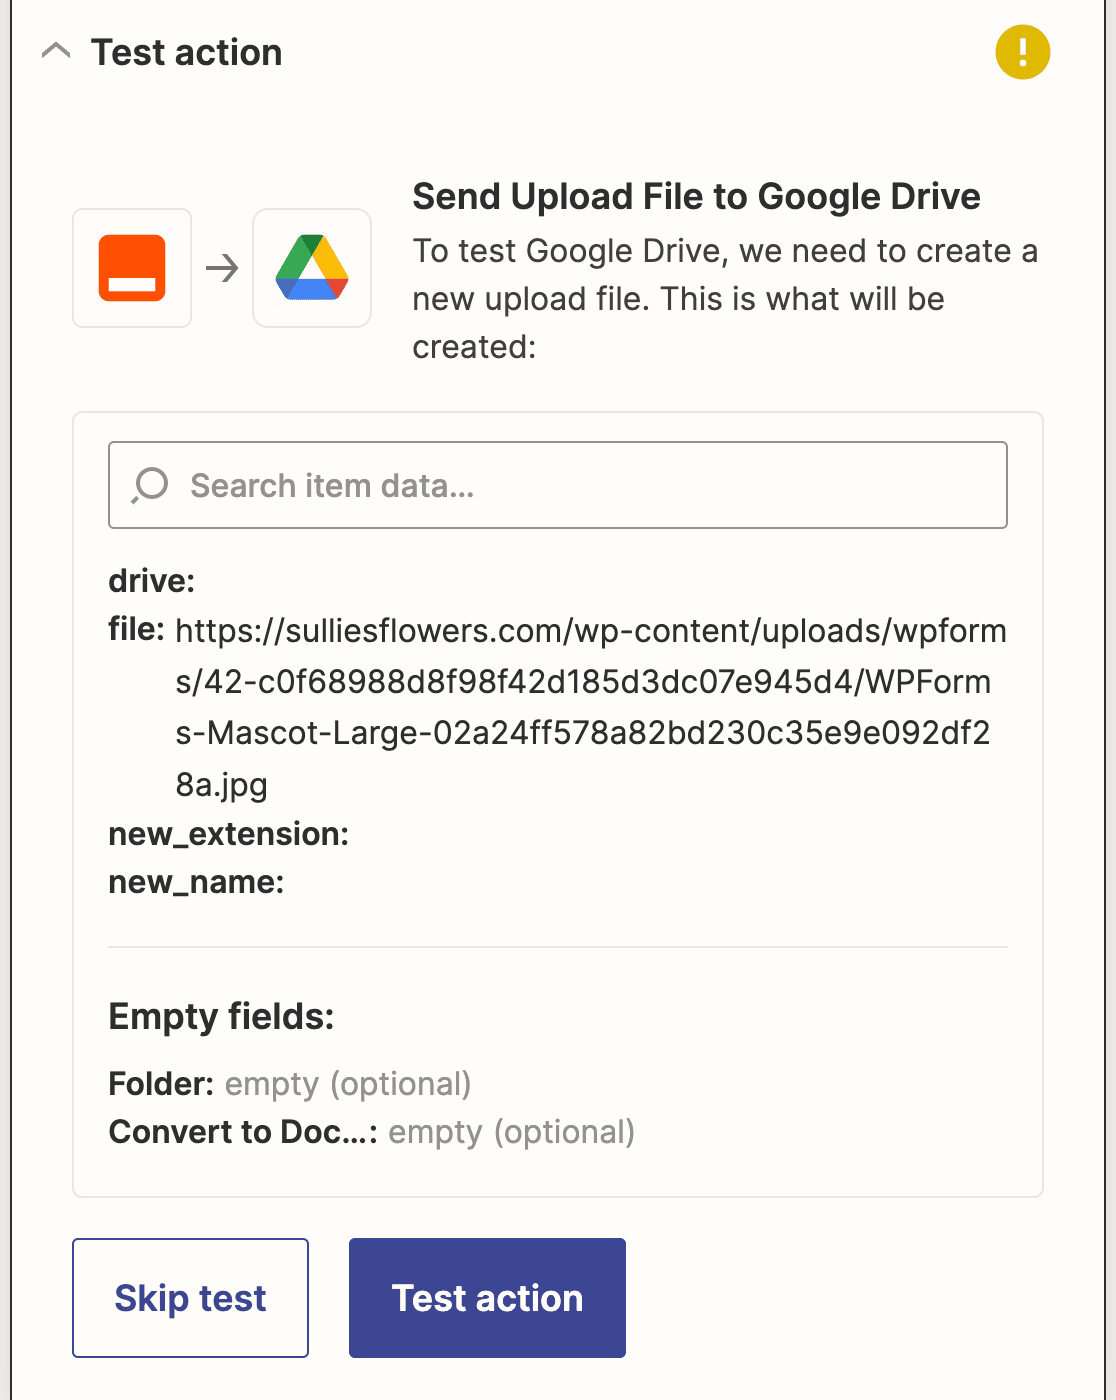 Testing your Zapier connection to Google Drive